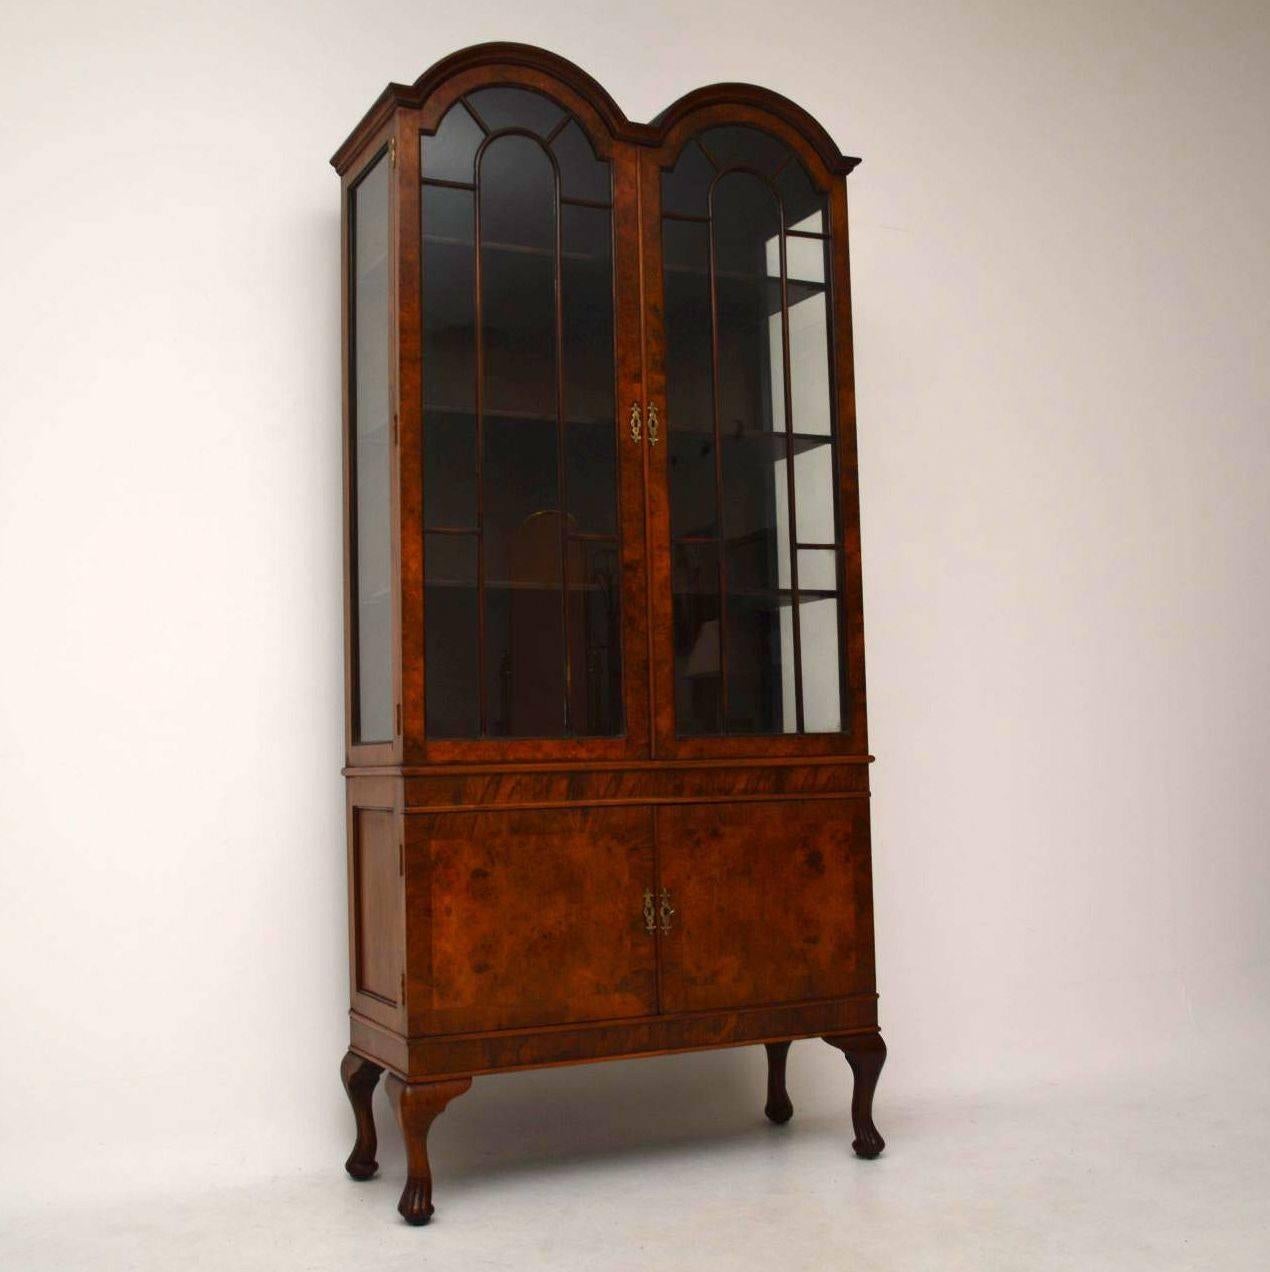 Impressive antique walnut display cabinet with a double arched top, two astral-glazed doors and two crossbanded burr walnut doors sitting on shaped Queen Anne legs. It’s in good condition with beautiful figuring in the woods and dates from circa